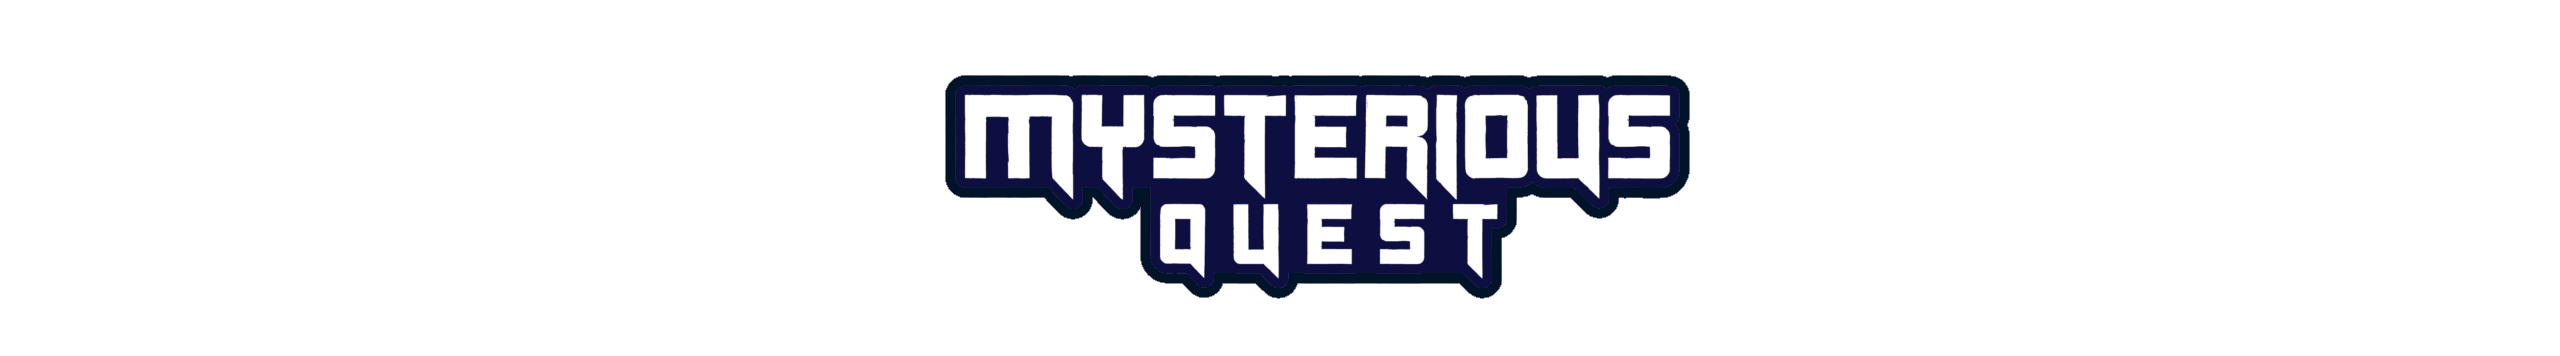 cropped-mysterious-quest-logo-blue.png